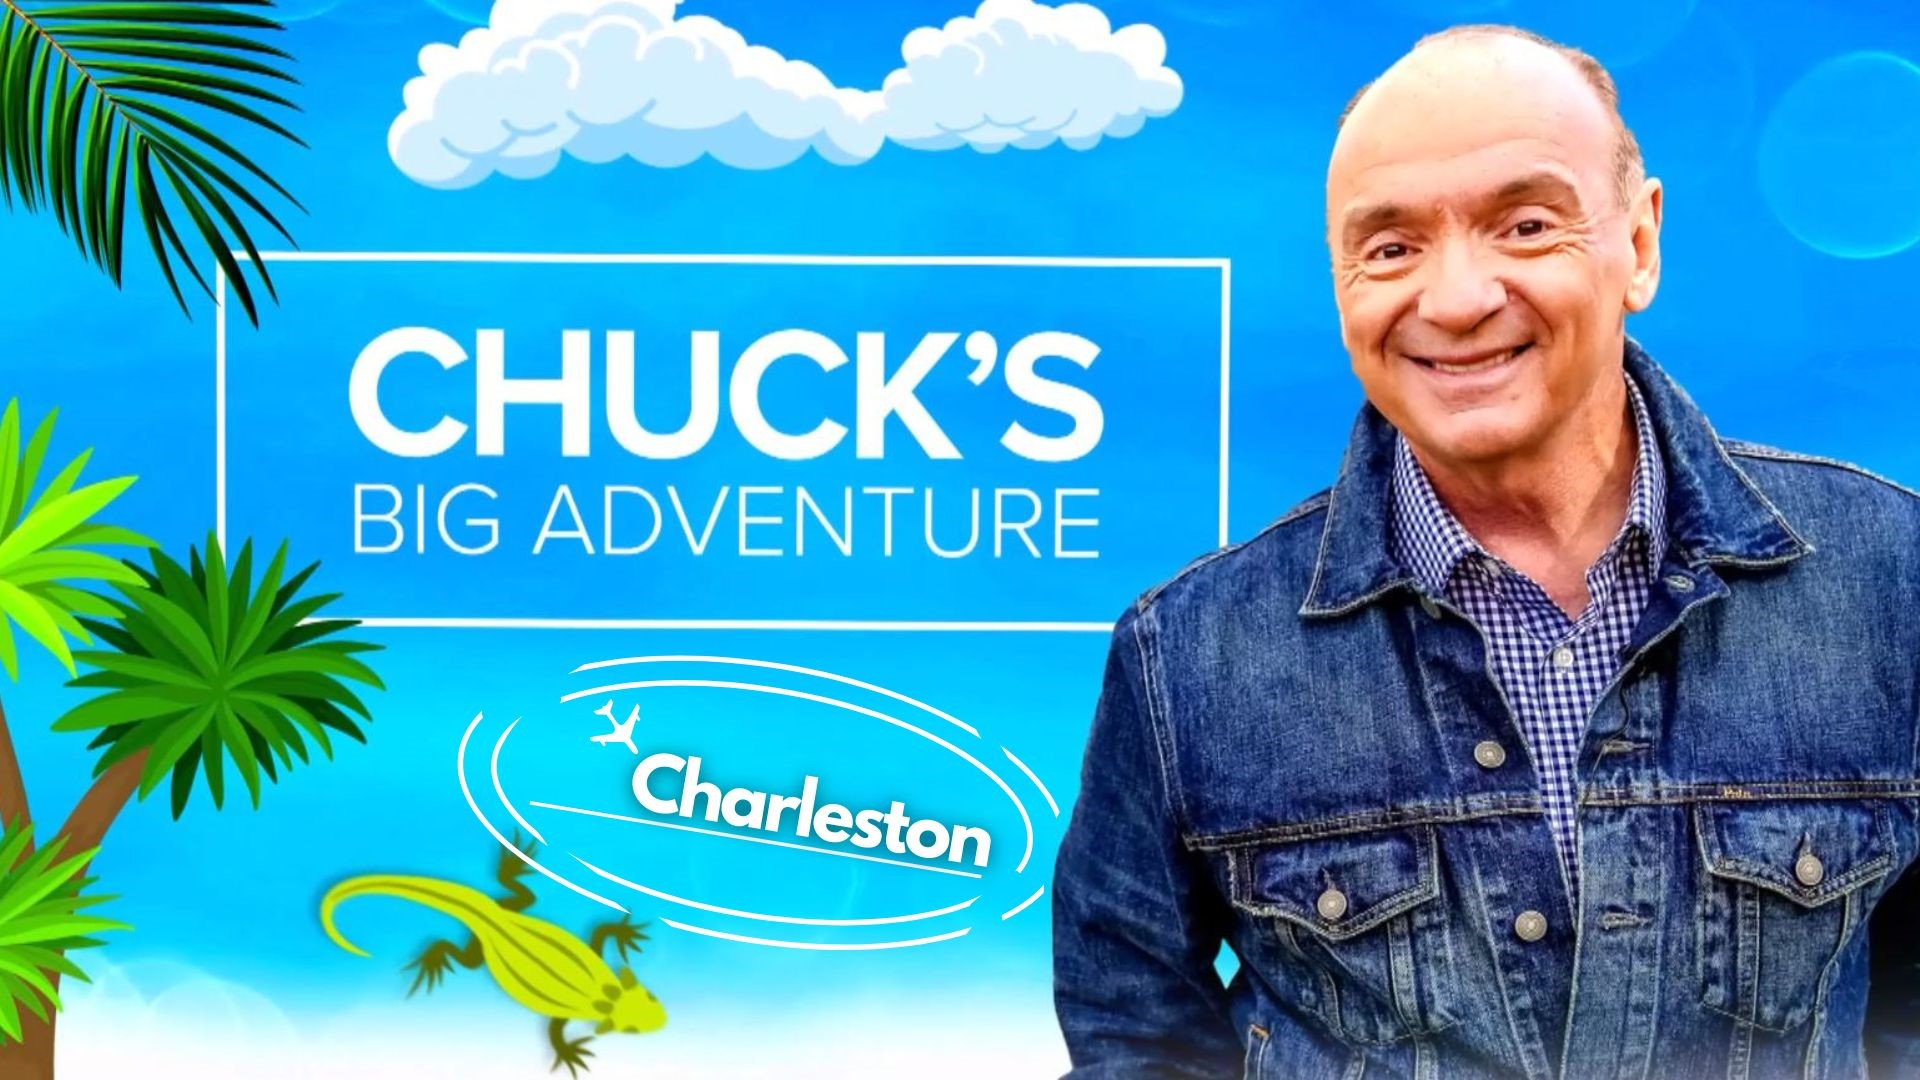 Chuck's latest big adventure takes us to Charleston, South Carolina. An incredible waterfront city, full of history and culture.